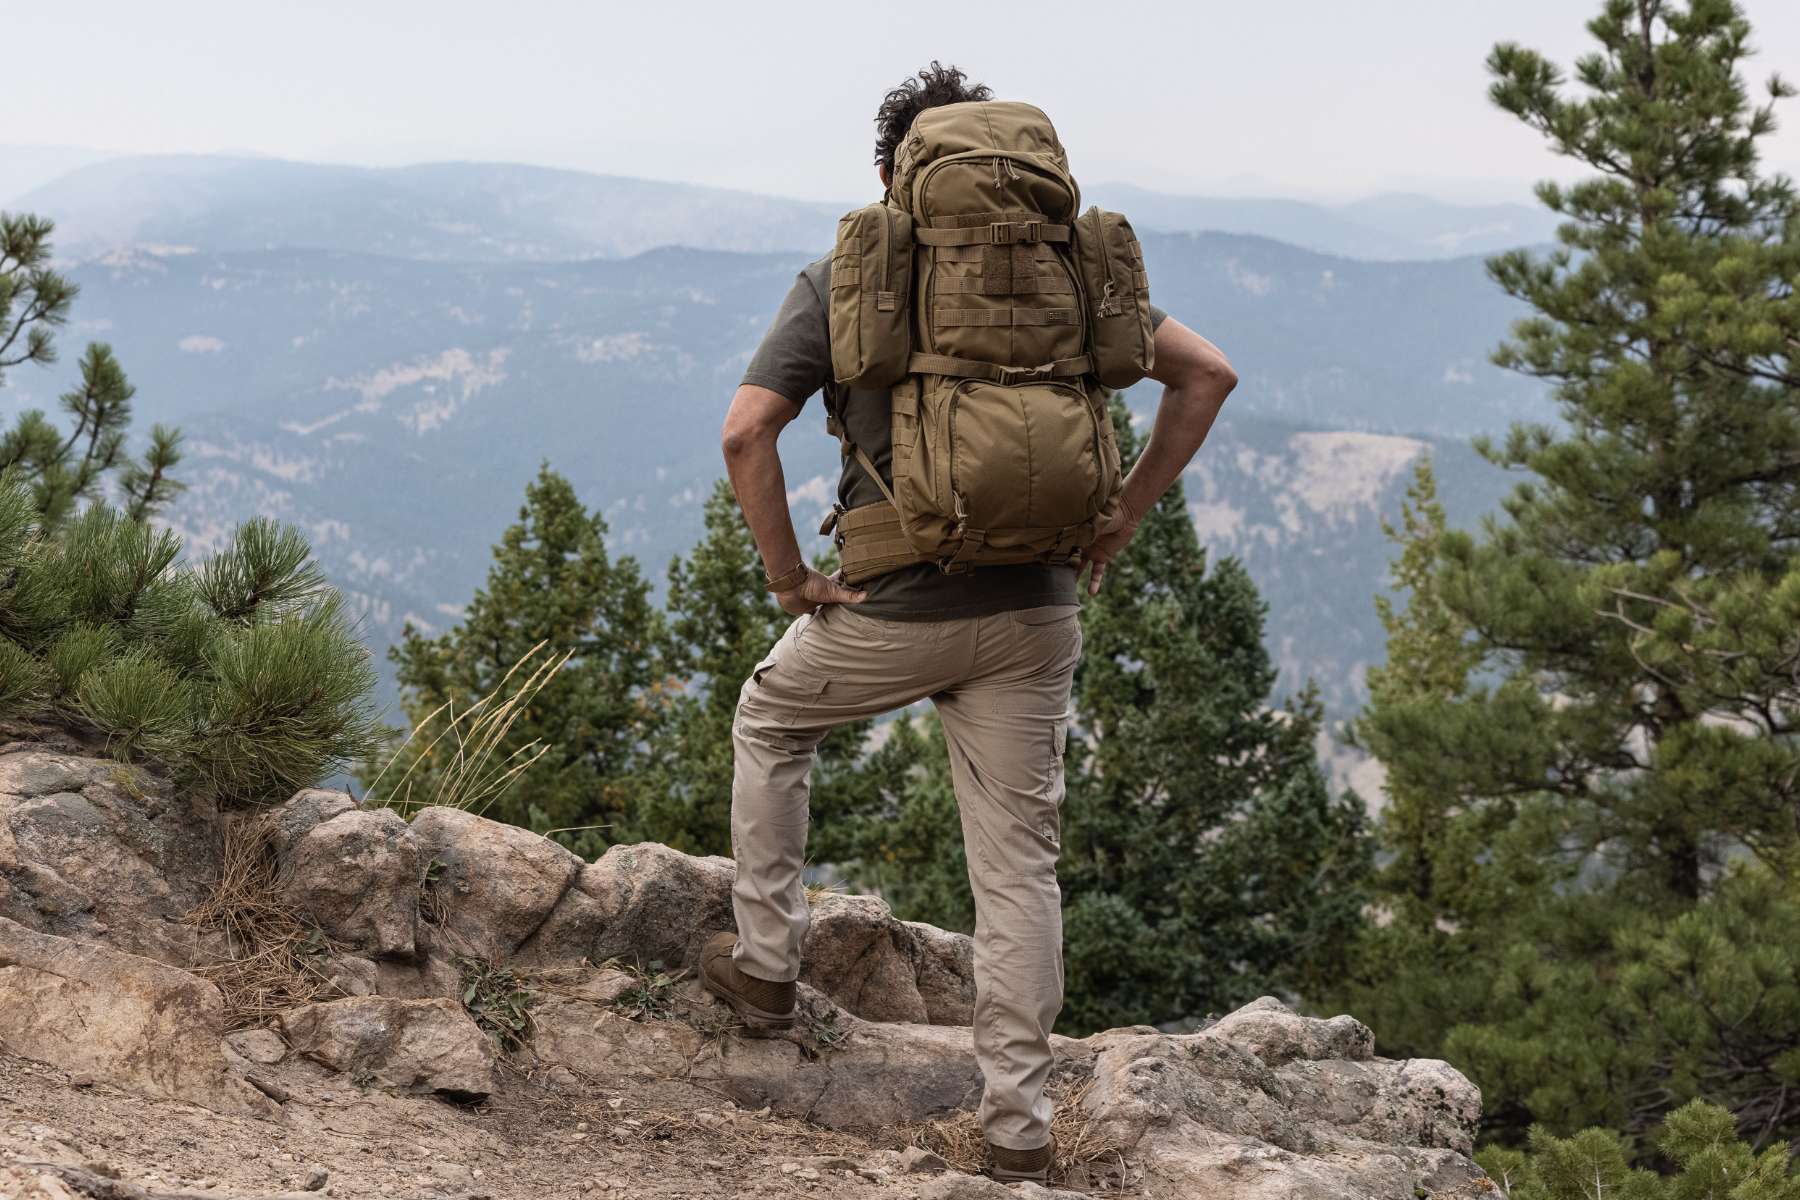 Explore Our Must Have Hiking Gear to Celebrate National Hiking Day